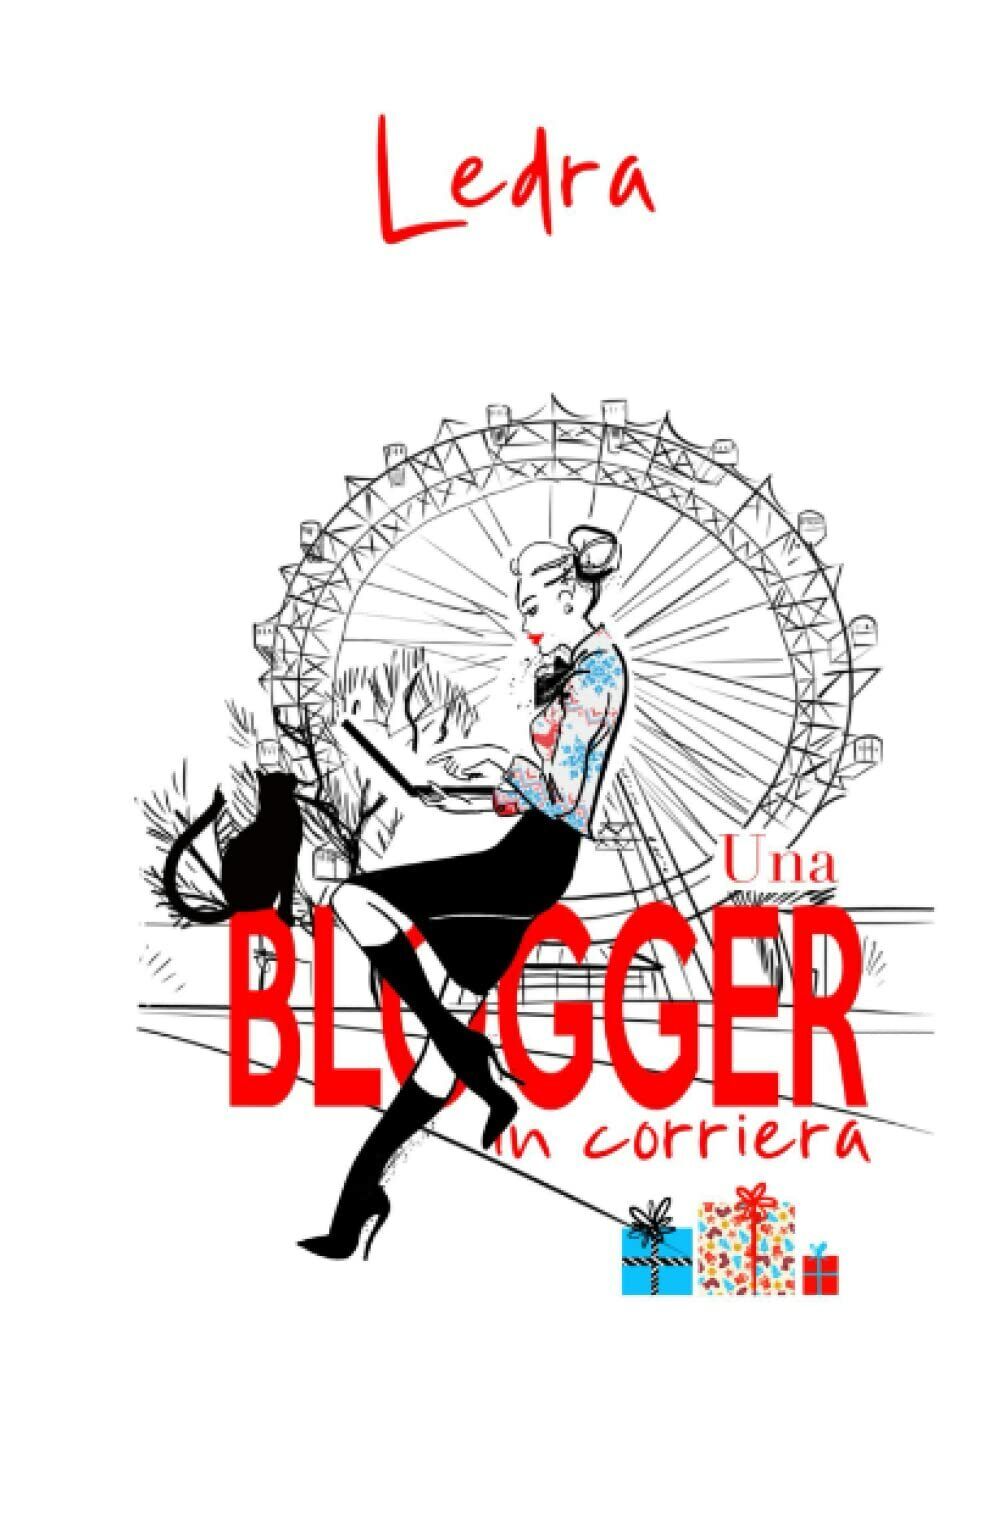  Una blogger in corriera di Ledra,  2021,  Indipendently Published